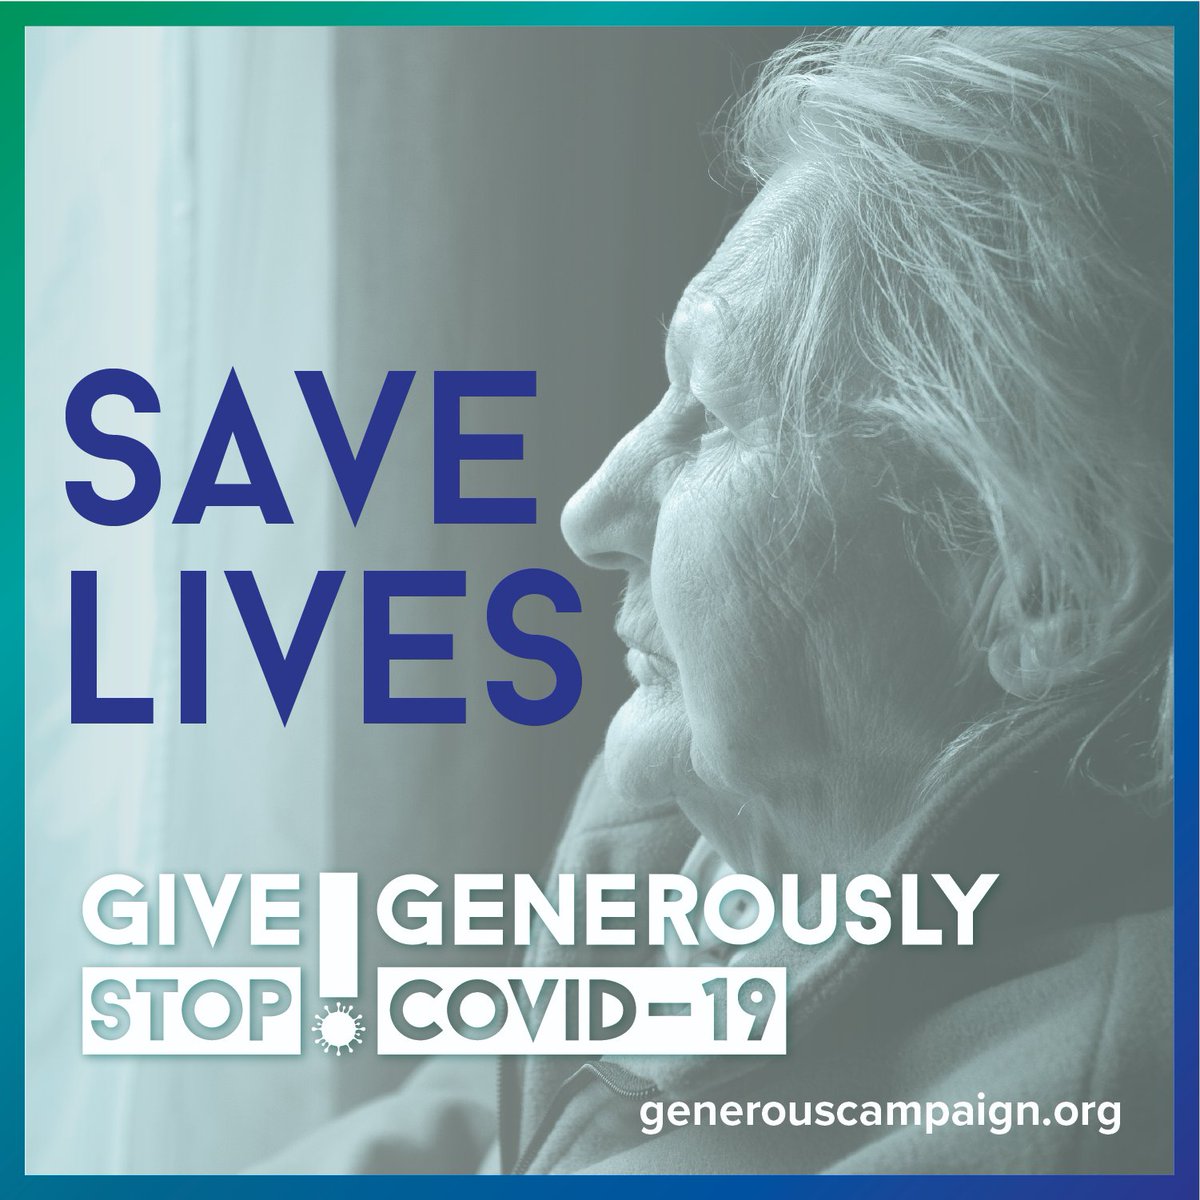 §  @G20org #GiveGenerously and #SaveLives – make sure developing countries get at least $1 trillion to #EndCOVID19Now! Join the #GenerousCampaign!